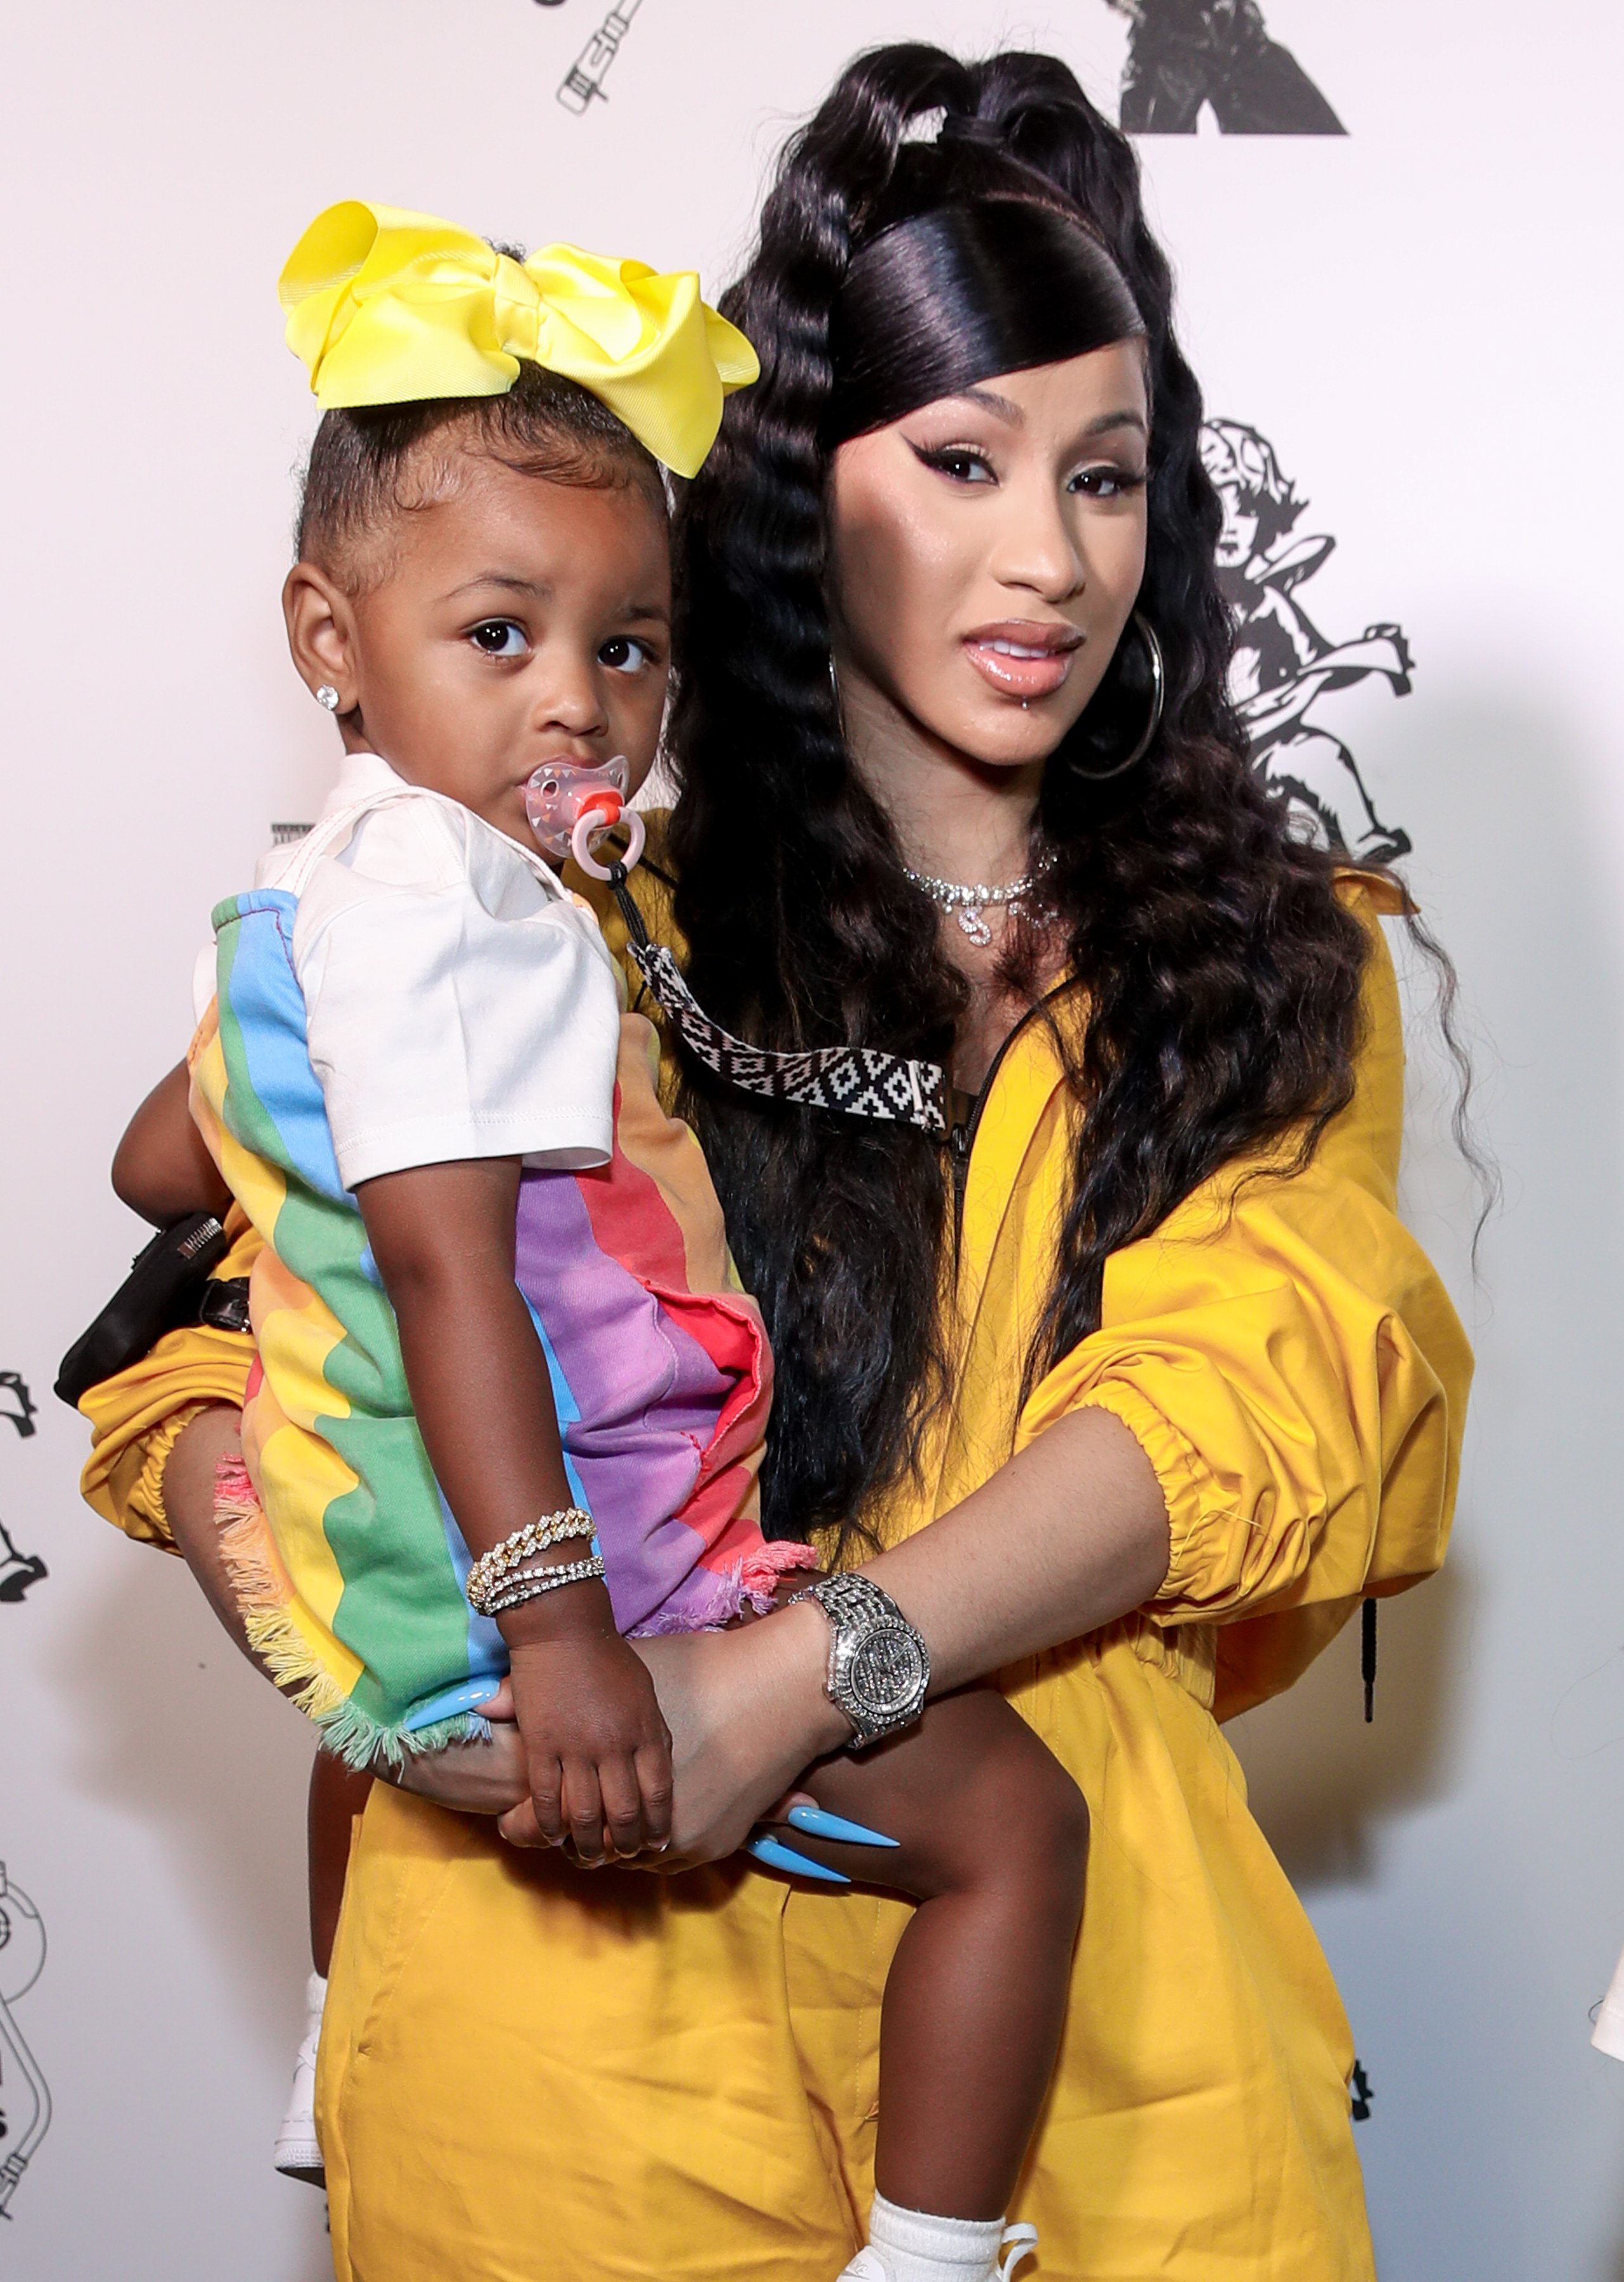 Cardi B and daughter Kulture at Teyana Taylor's "The Album" Listening Party on June 17, 2020 | Photo: Getty Images